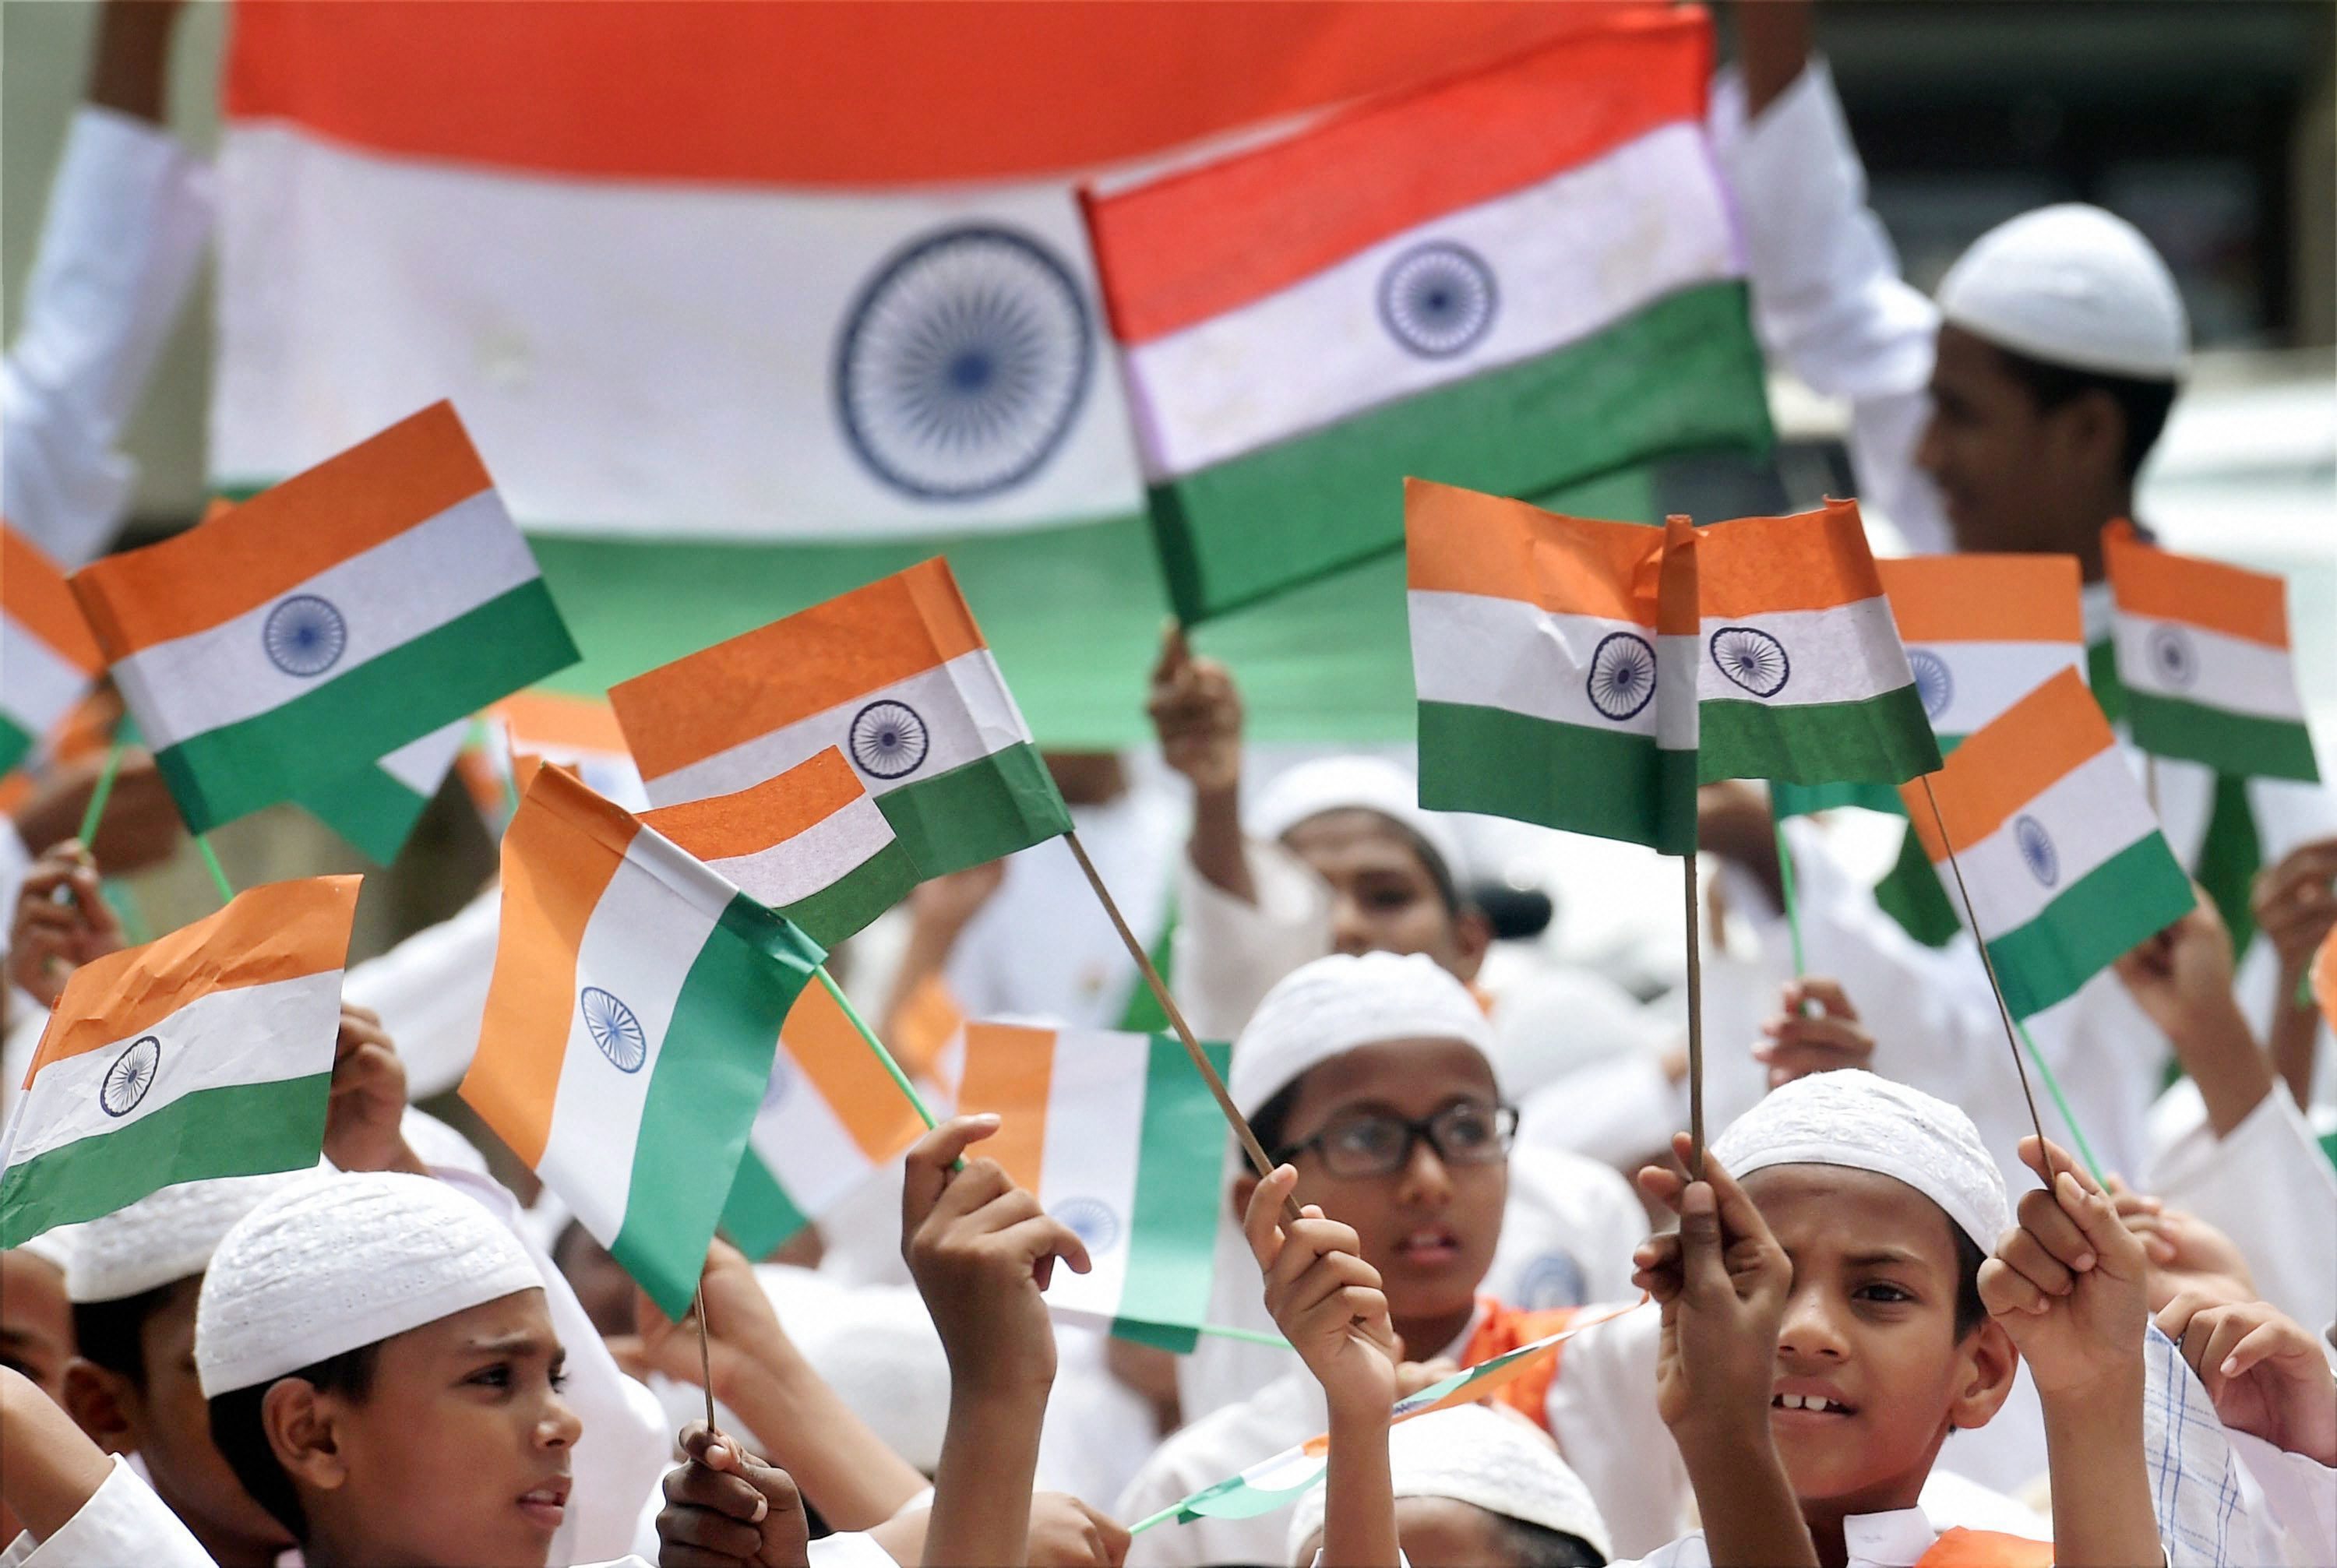 Mumbai: Students wave the Indian tricolor flag while celebrating the 71st Independence Day in Mumbai on Tuesday. PTI Photo by Santosh Hirlekar(PTI8_15_2017_000183B)